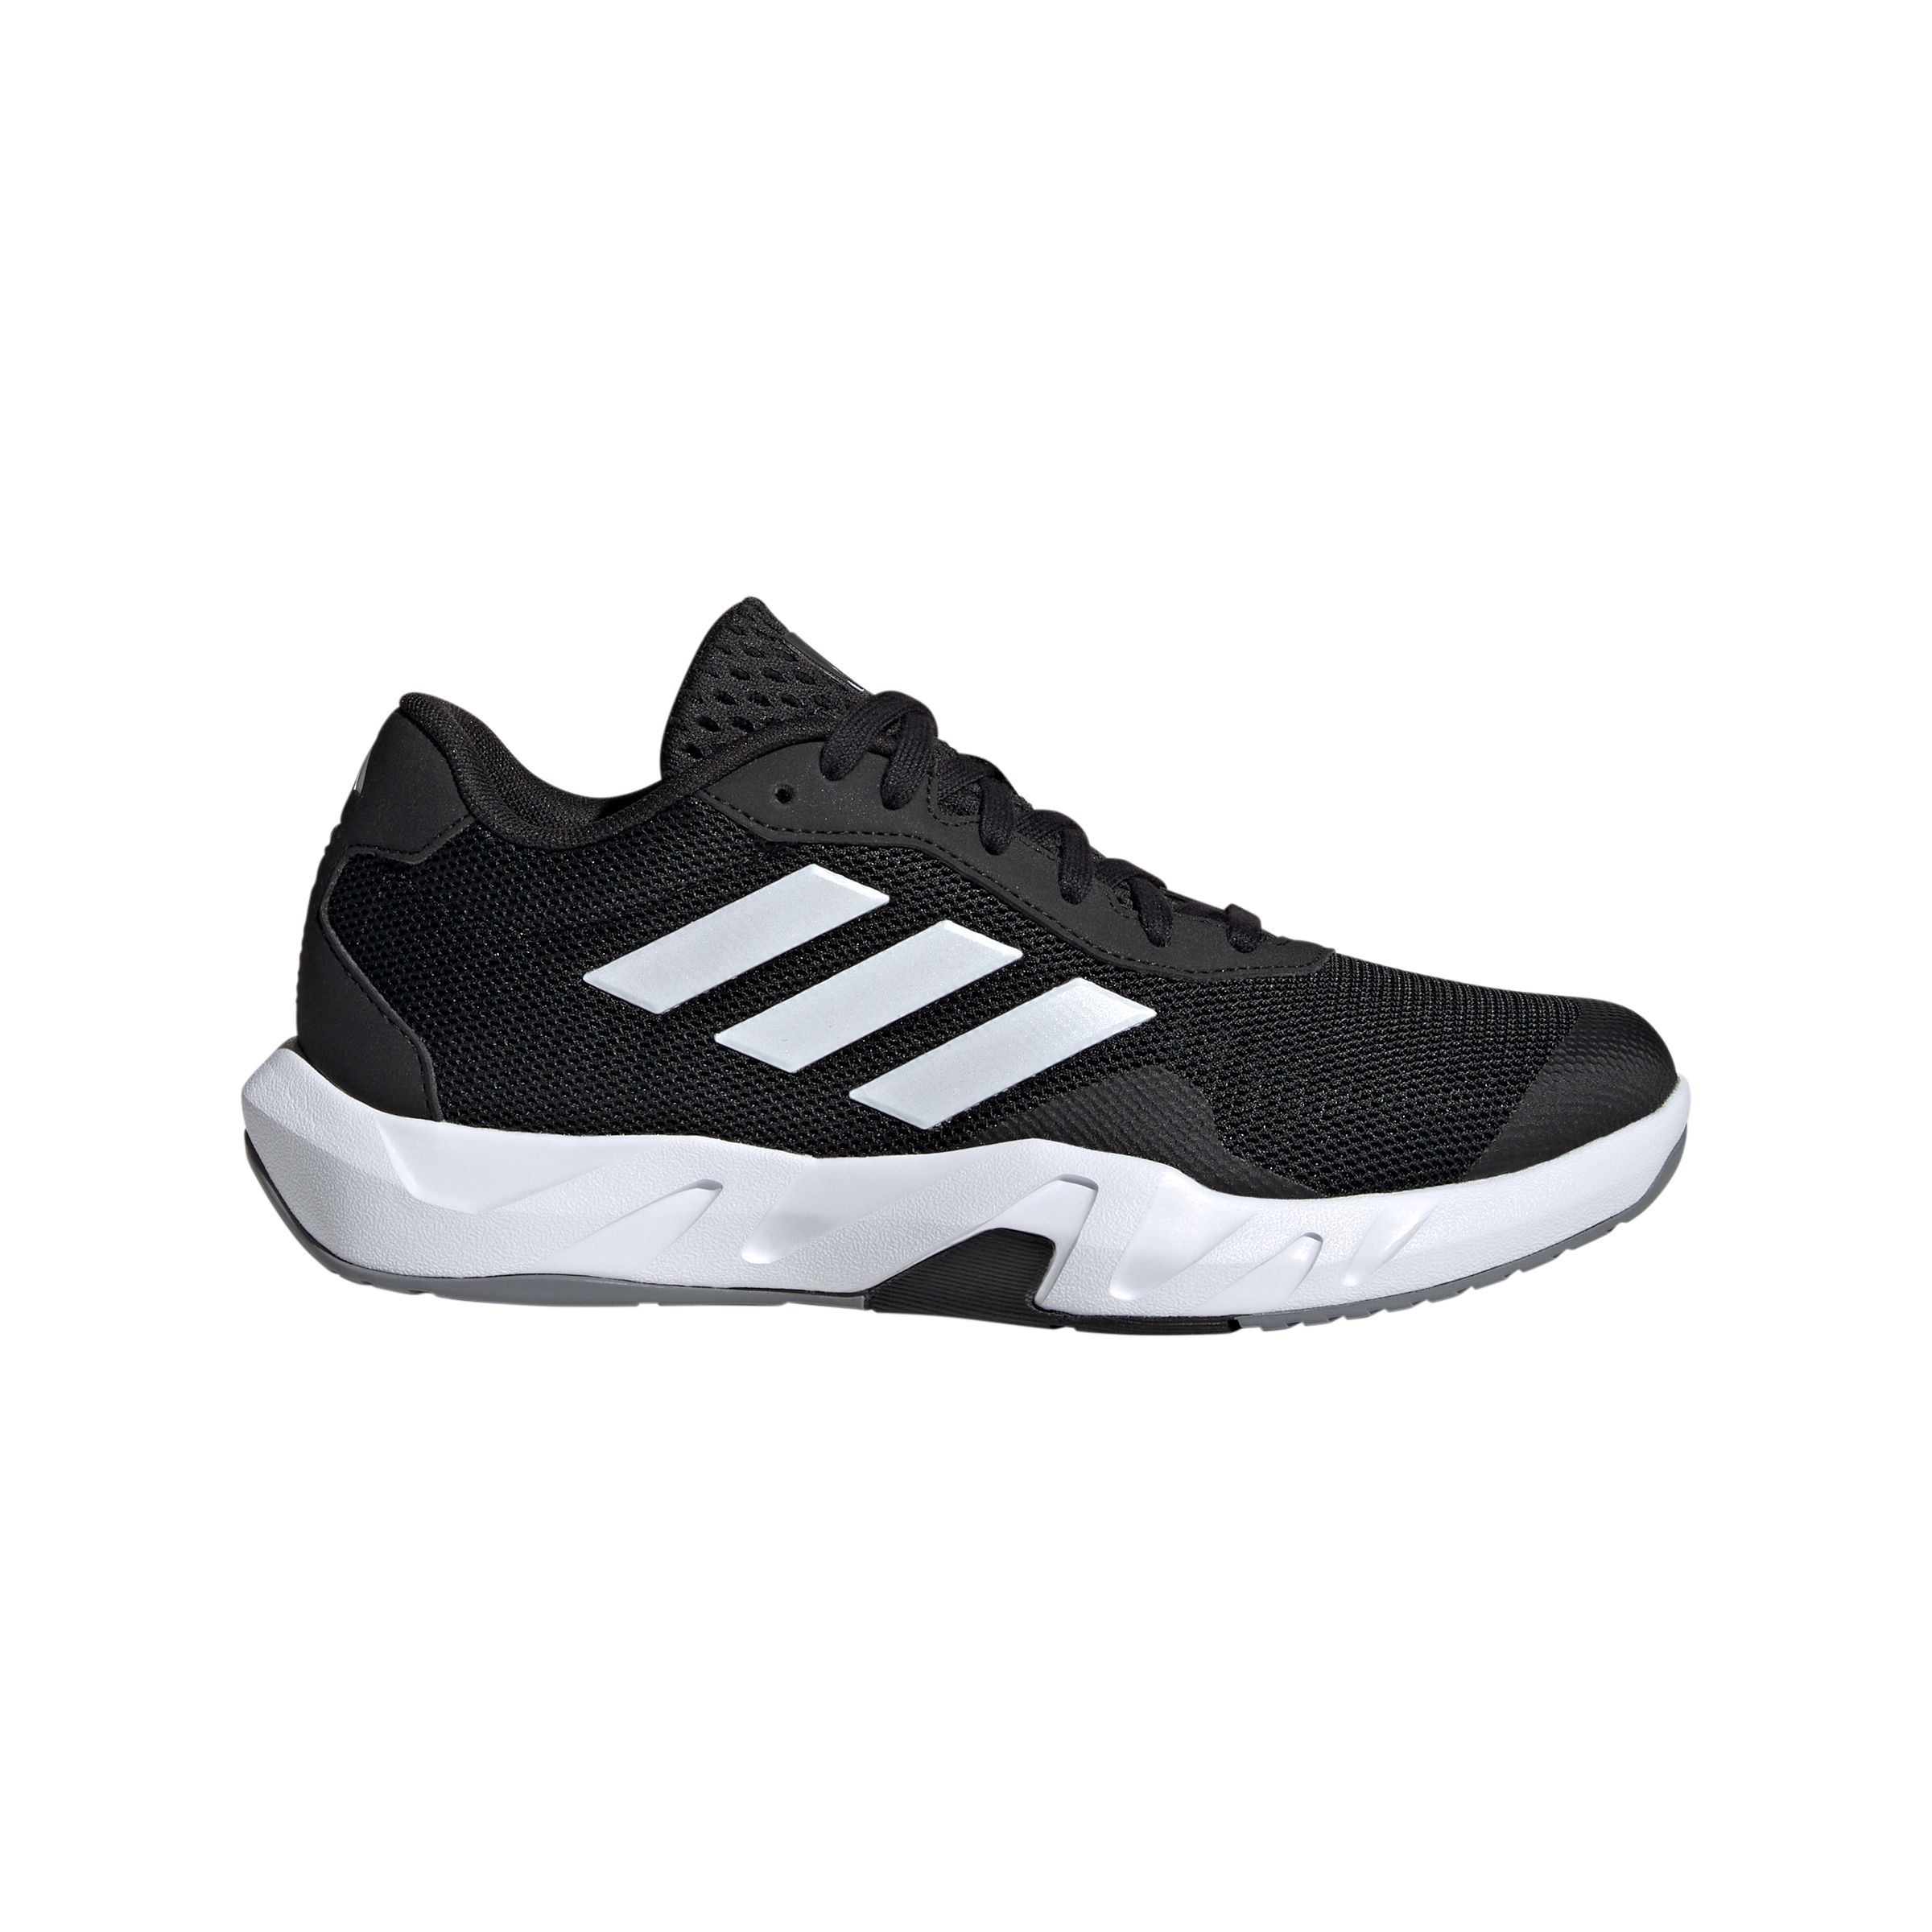 Image of adidas Women's Amplimove TR Training Shoes